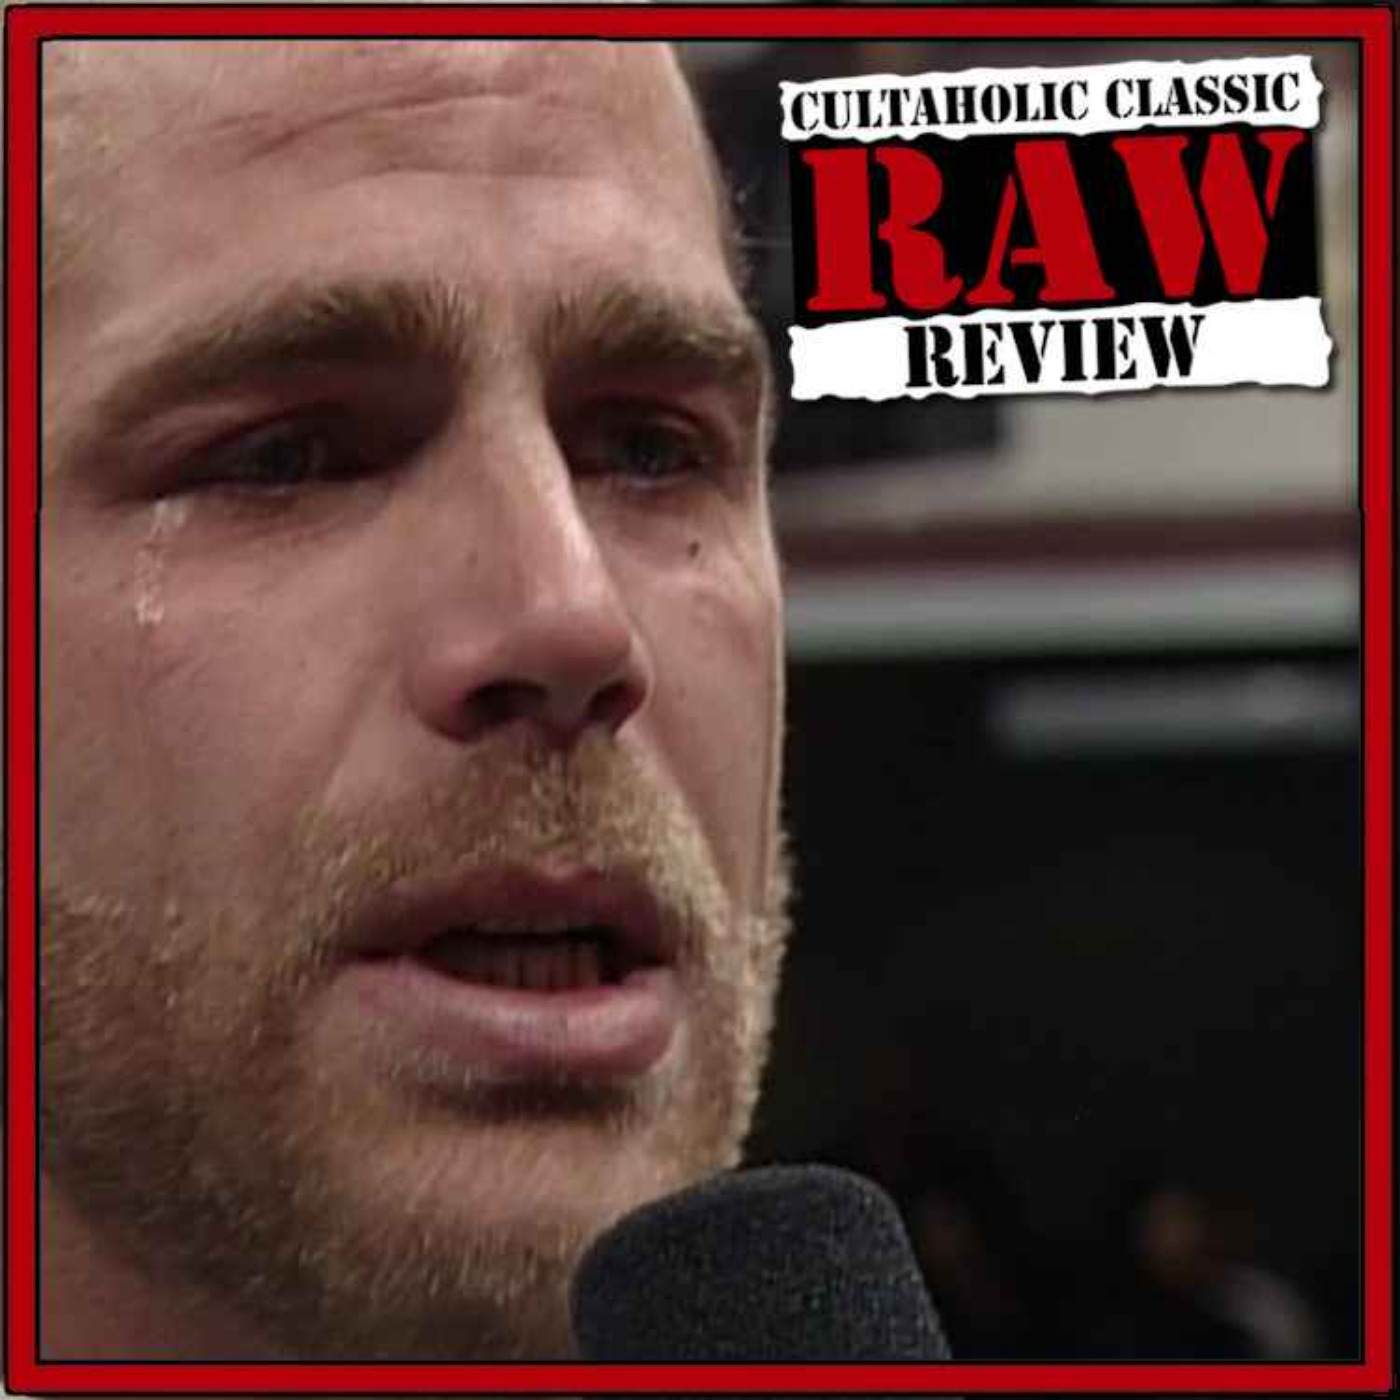 THURSDAY WWE Raw THURSDAY - Shawn Michaels Has Lost His Smile